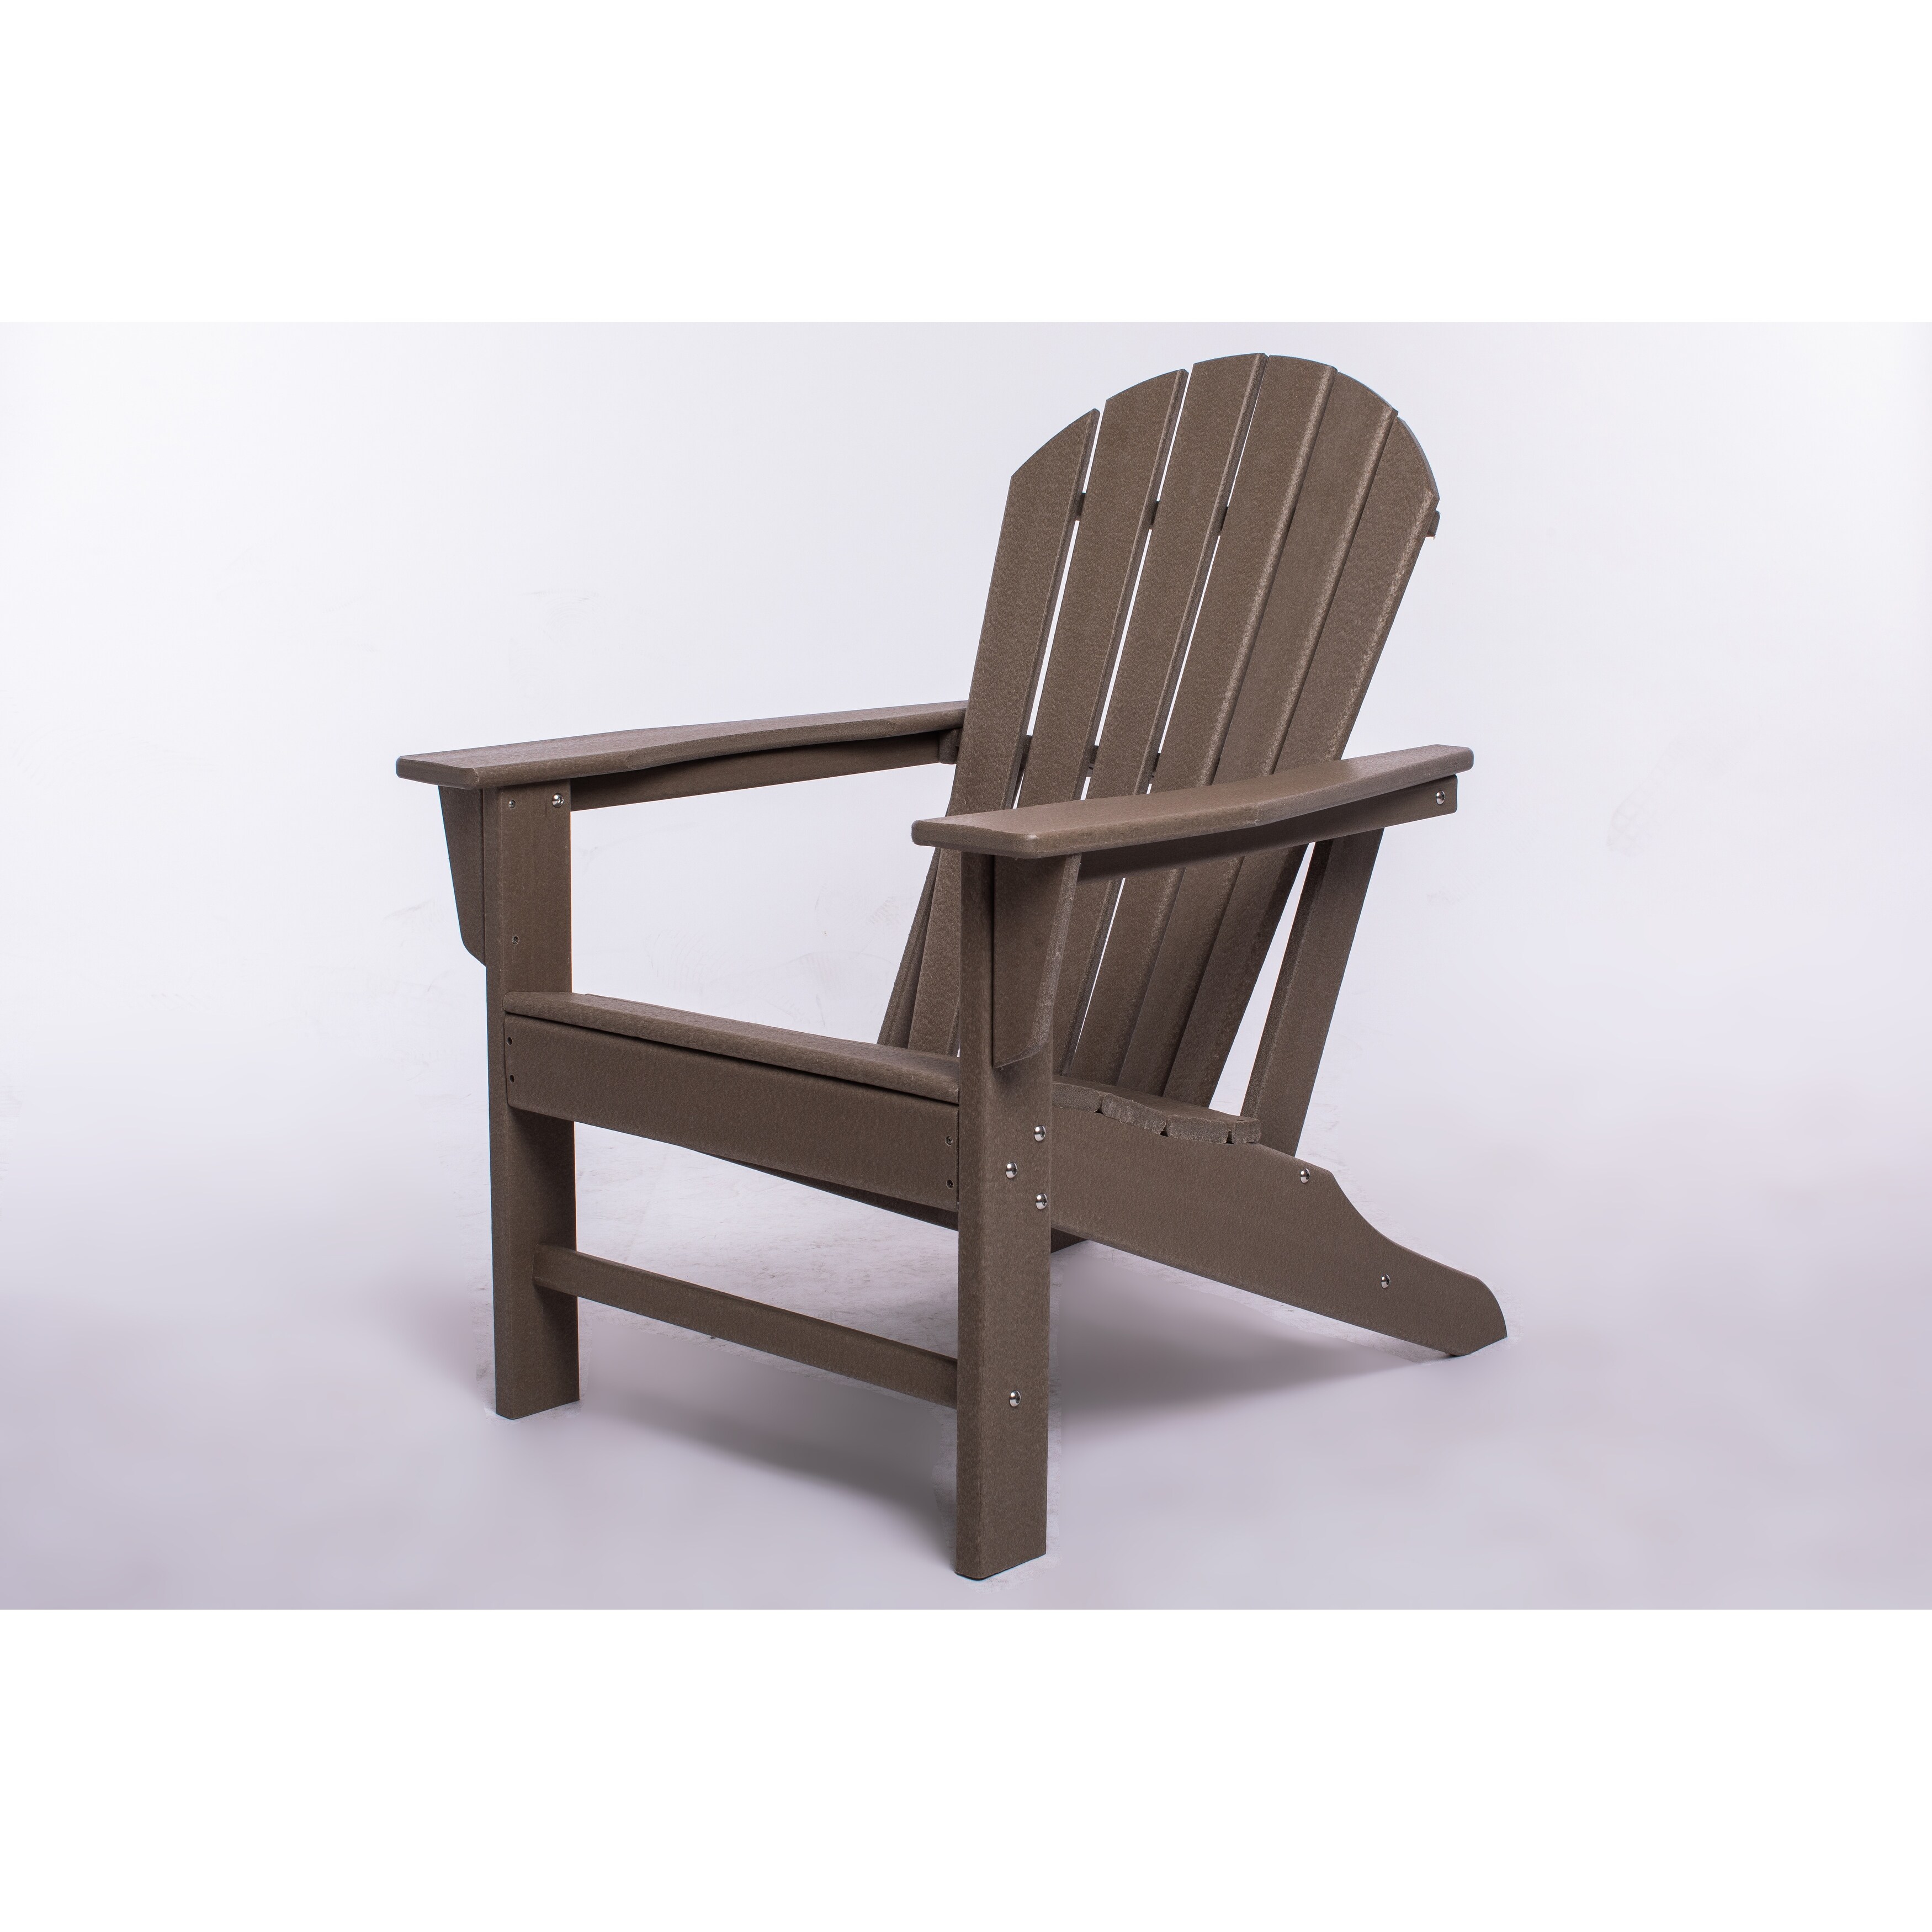 Solid All-weather Polystyrene Hdpe Resin Wood Adirondack Chair